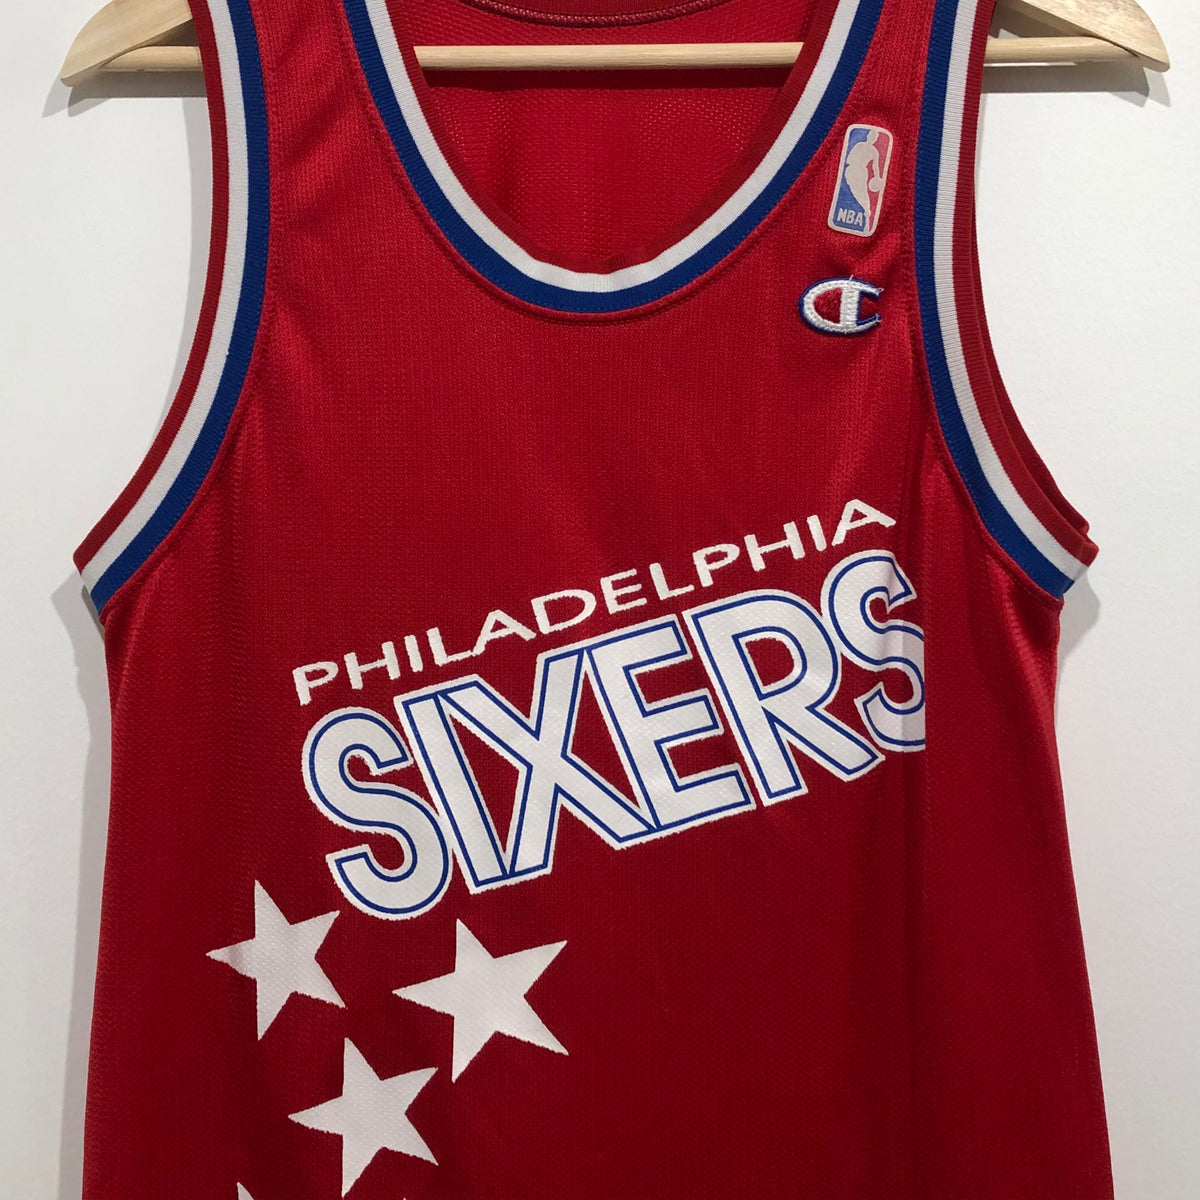 Philadelphia Sixers Bleached/upcycled T Shirt Sz M 